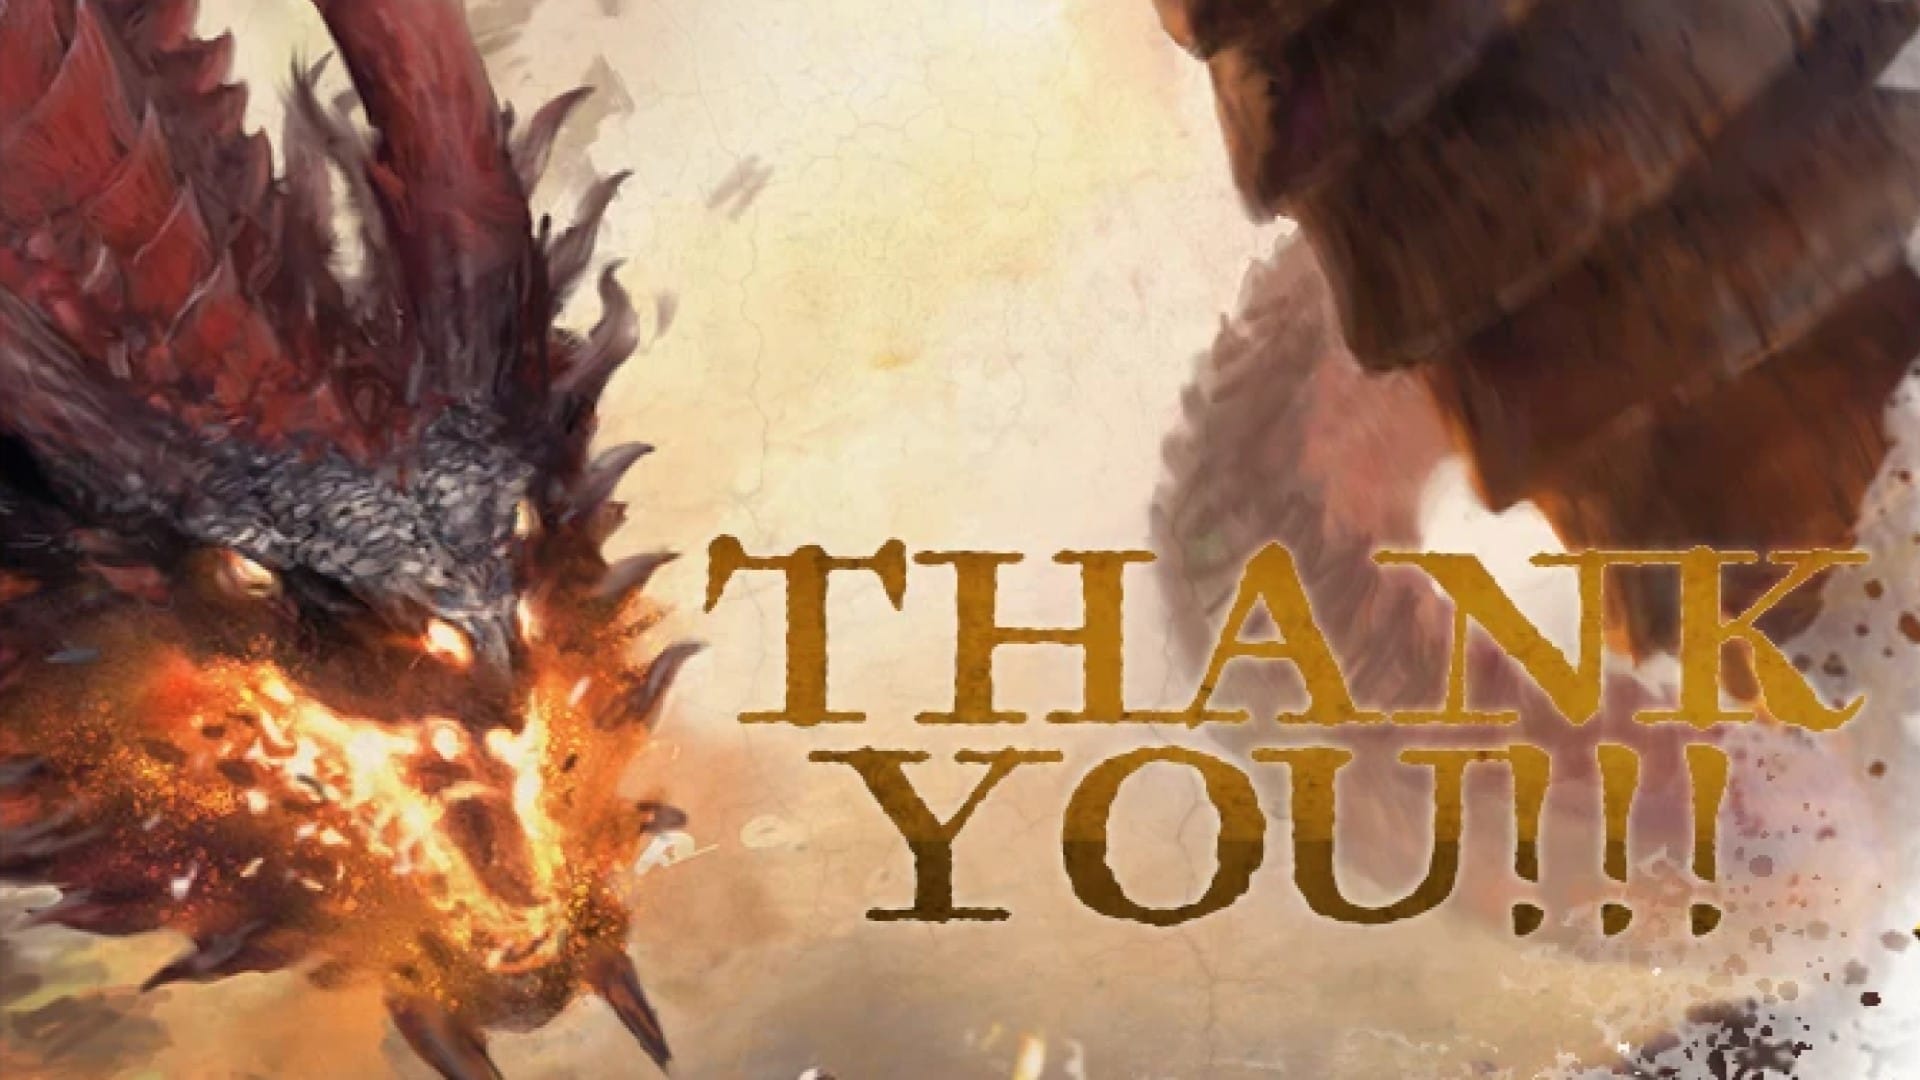 Promotional artwork from A Song of Ice & Fire: Tactics, showing a giant dragon followed by a "Thank You" message.